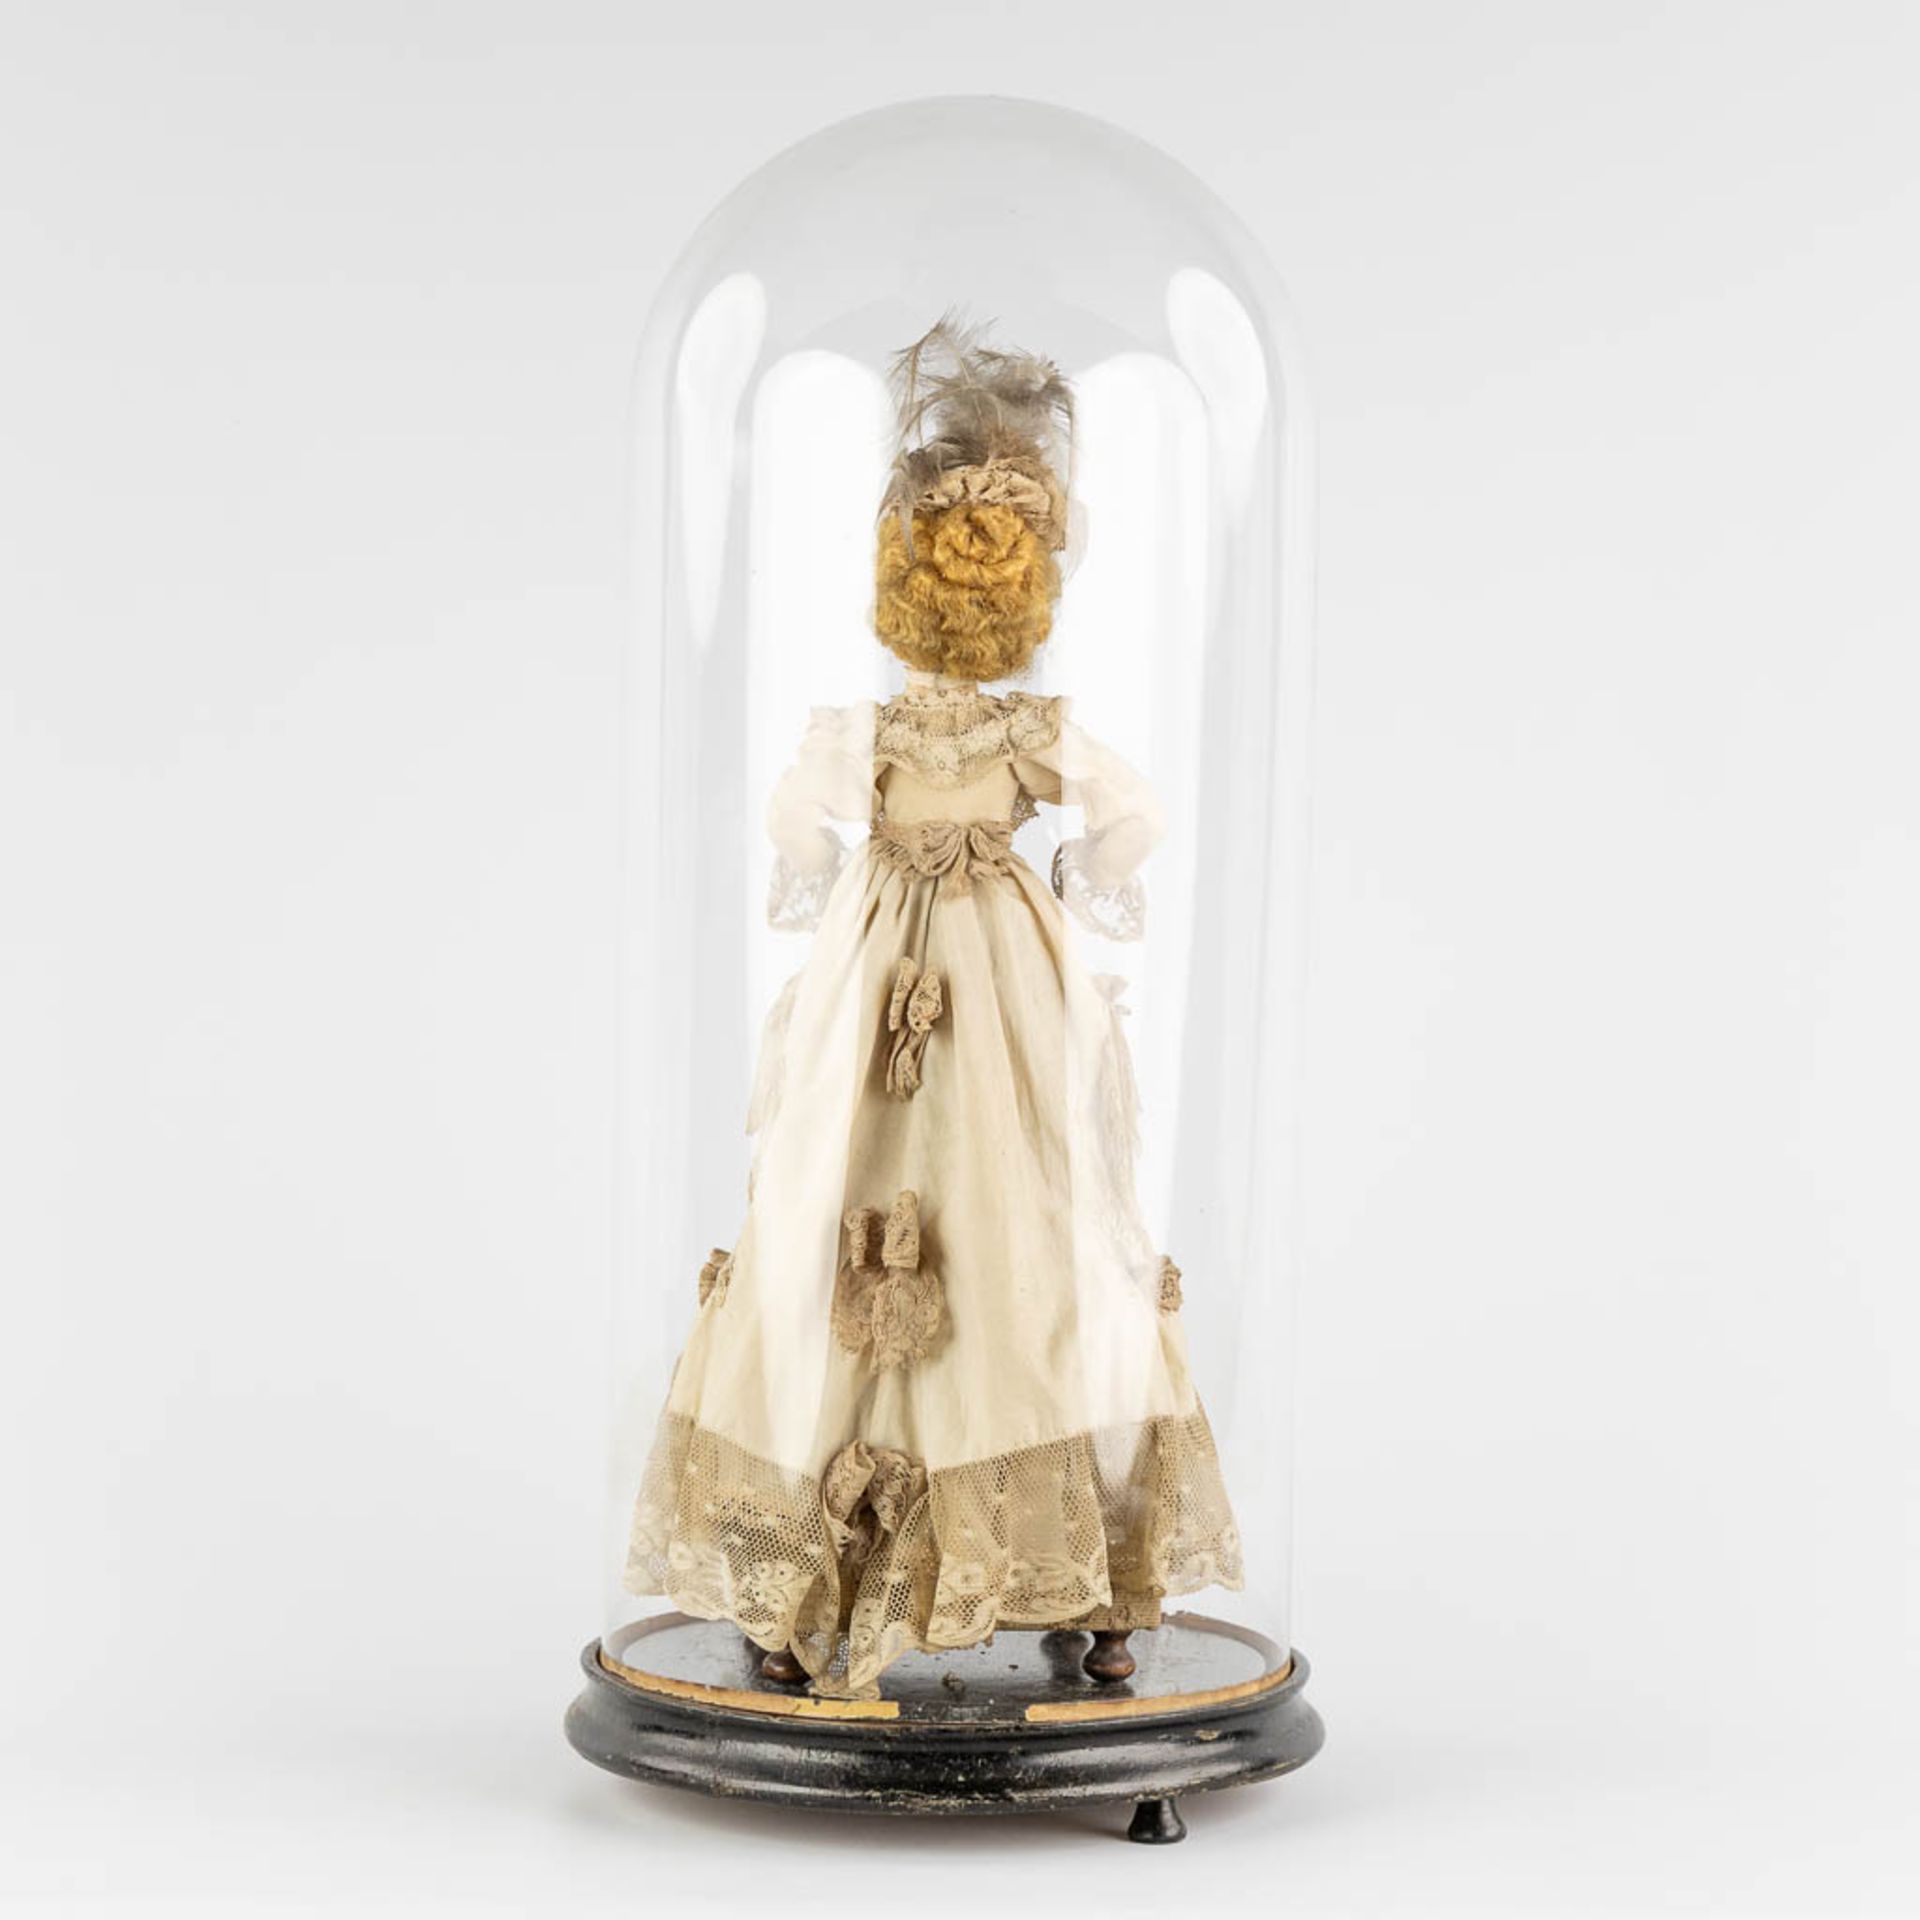 An antique 'Automata', in lace dressed doll with a music box. Under a glass dome, Circa 1920. (H:48 - Image 4 of 13